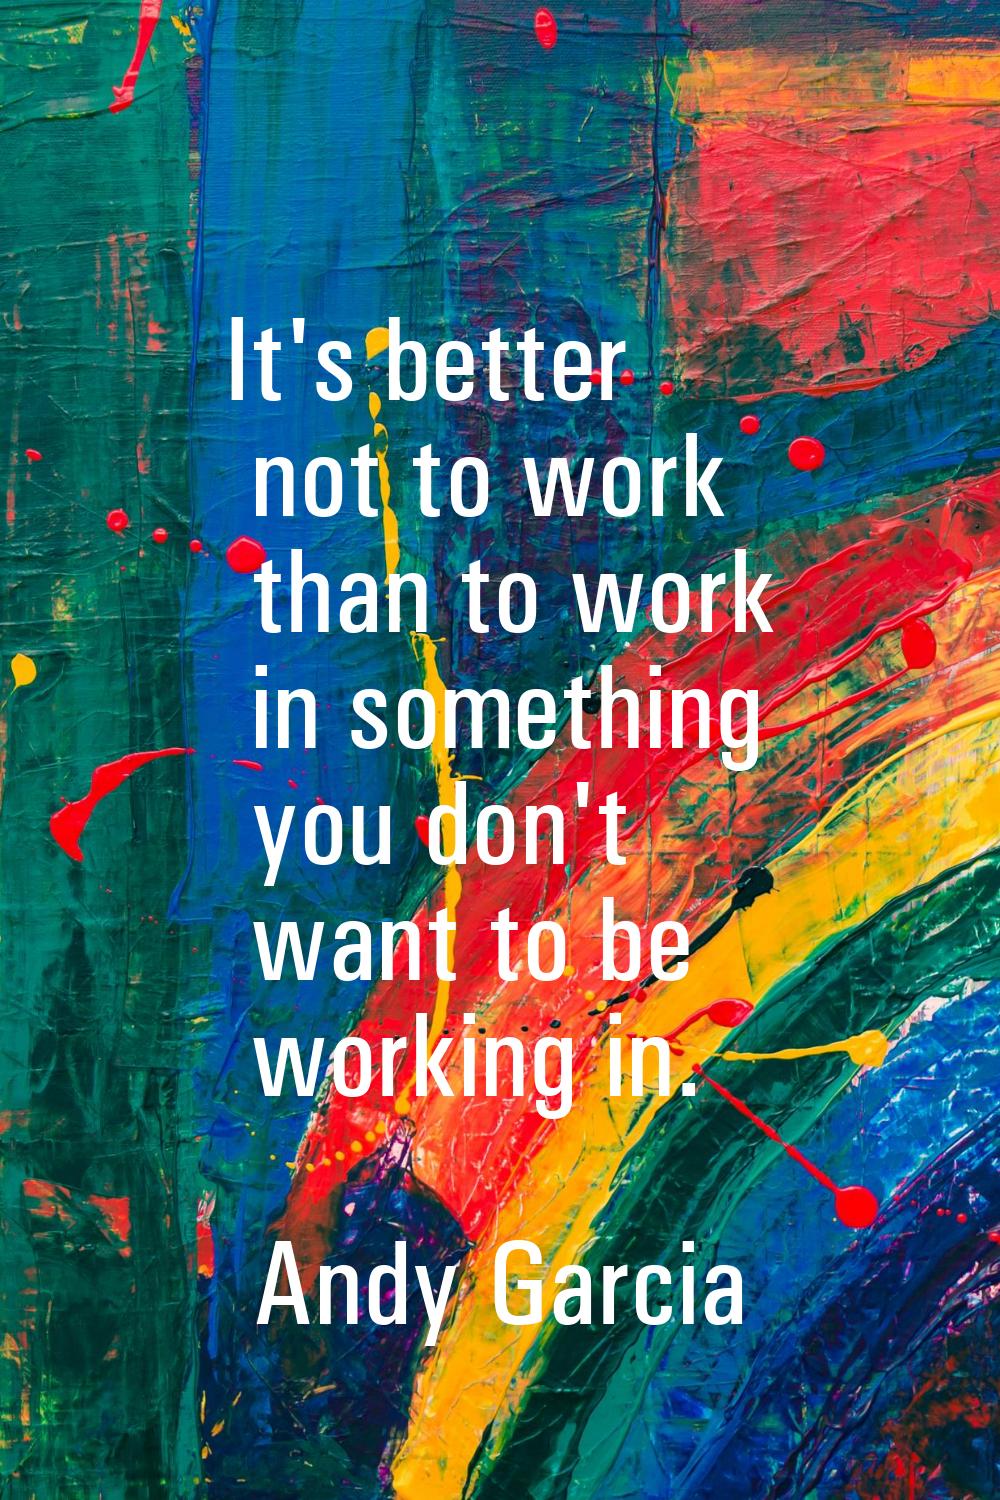 It's better not to work than to work in something you don't want to be working in.